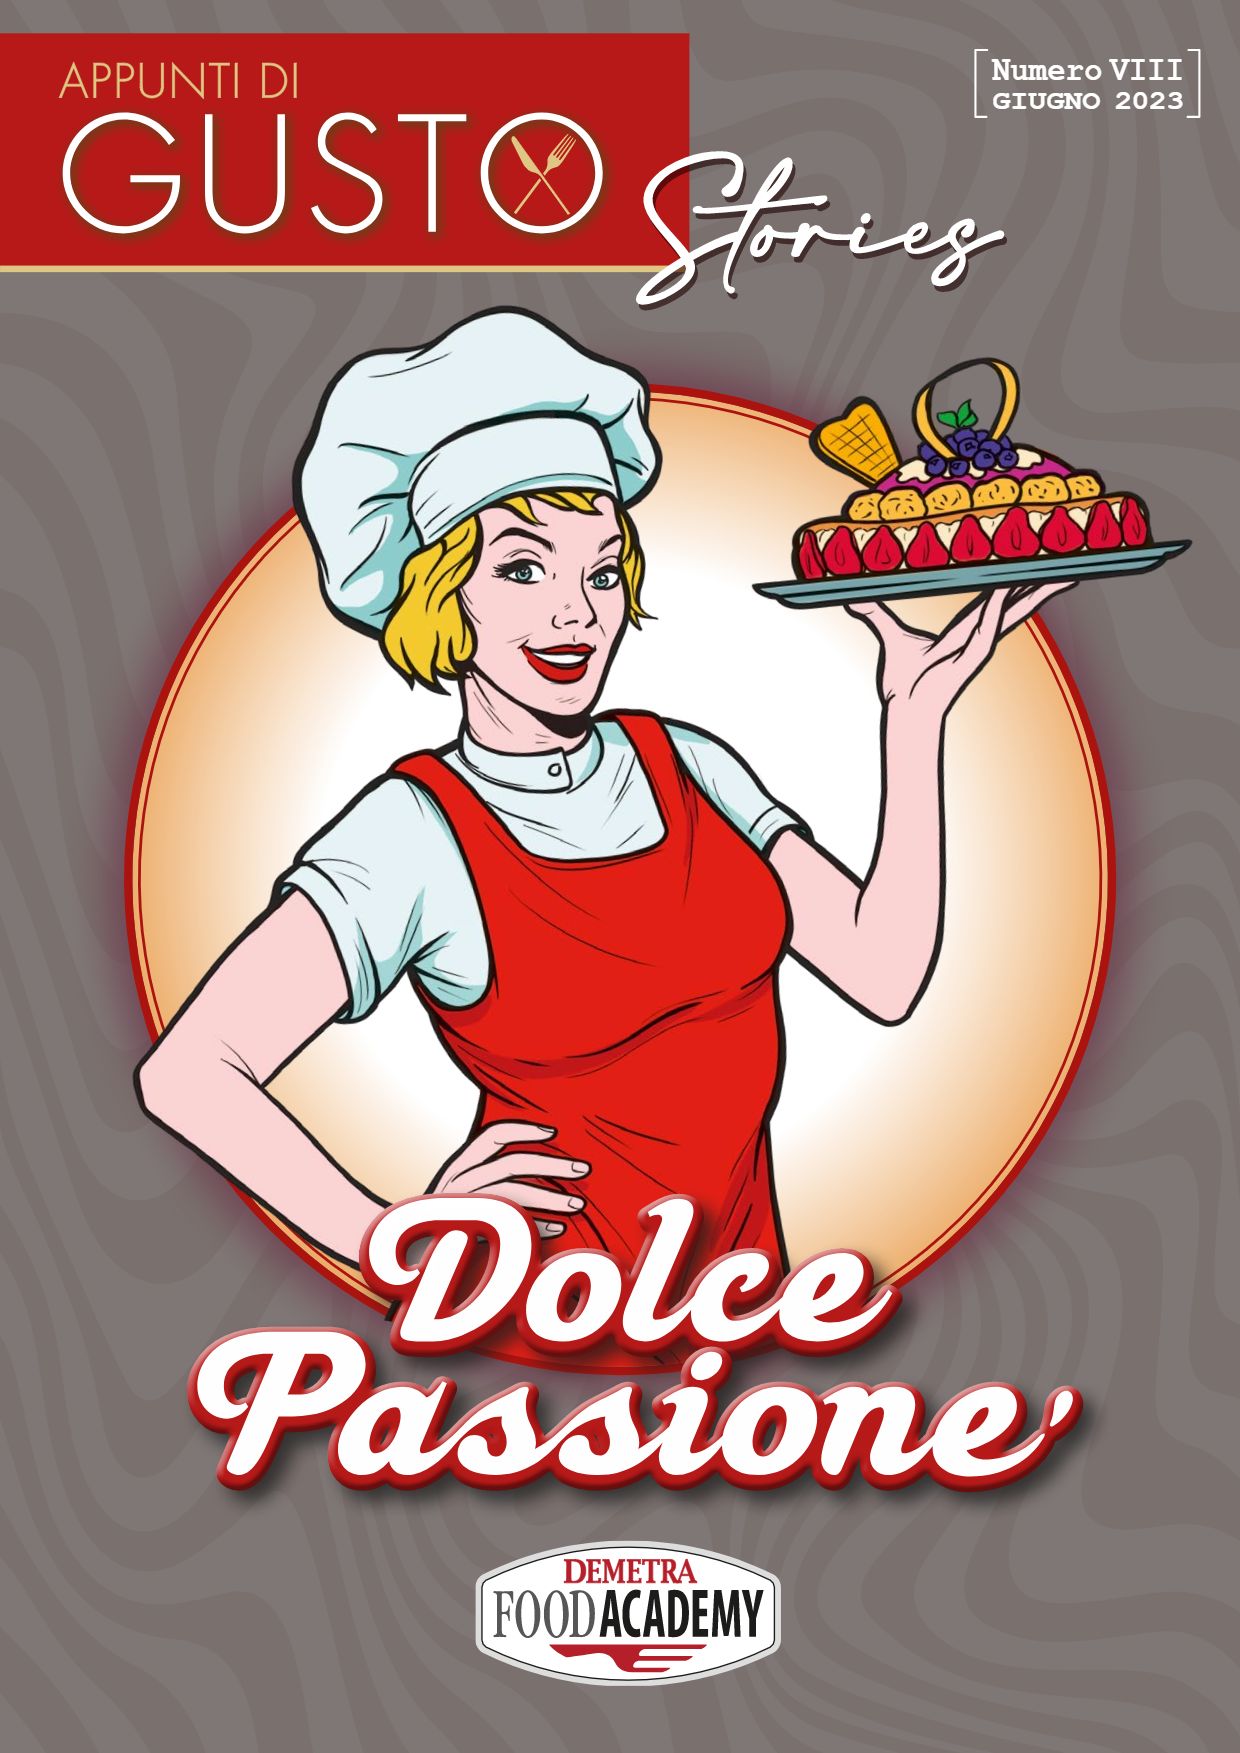 Appunti di Gusto Stories VIII Douce Passion 2023